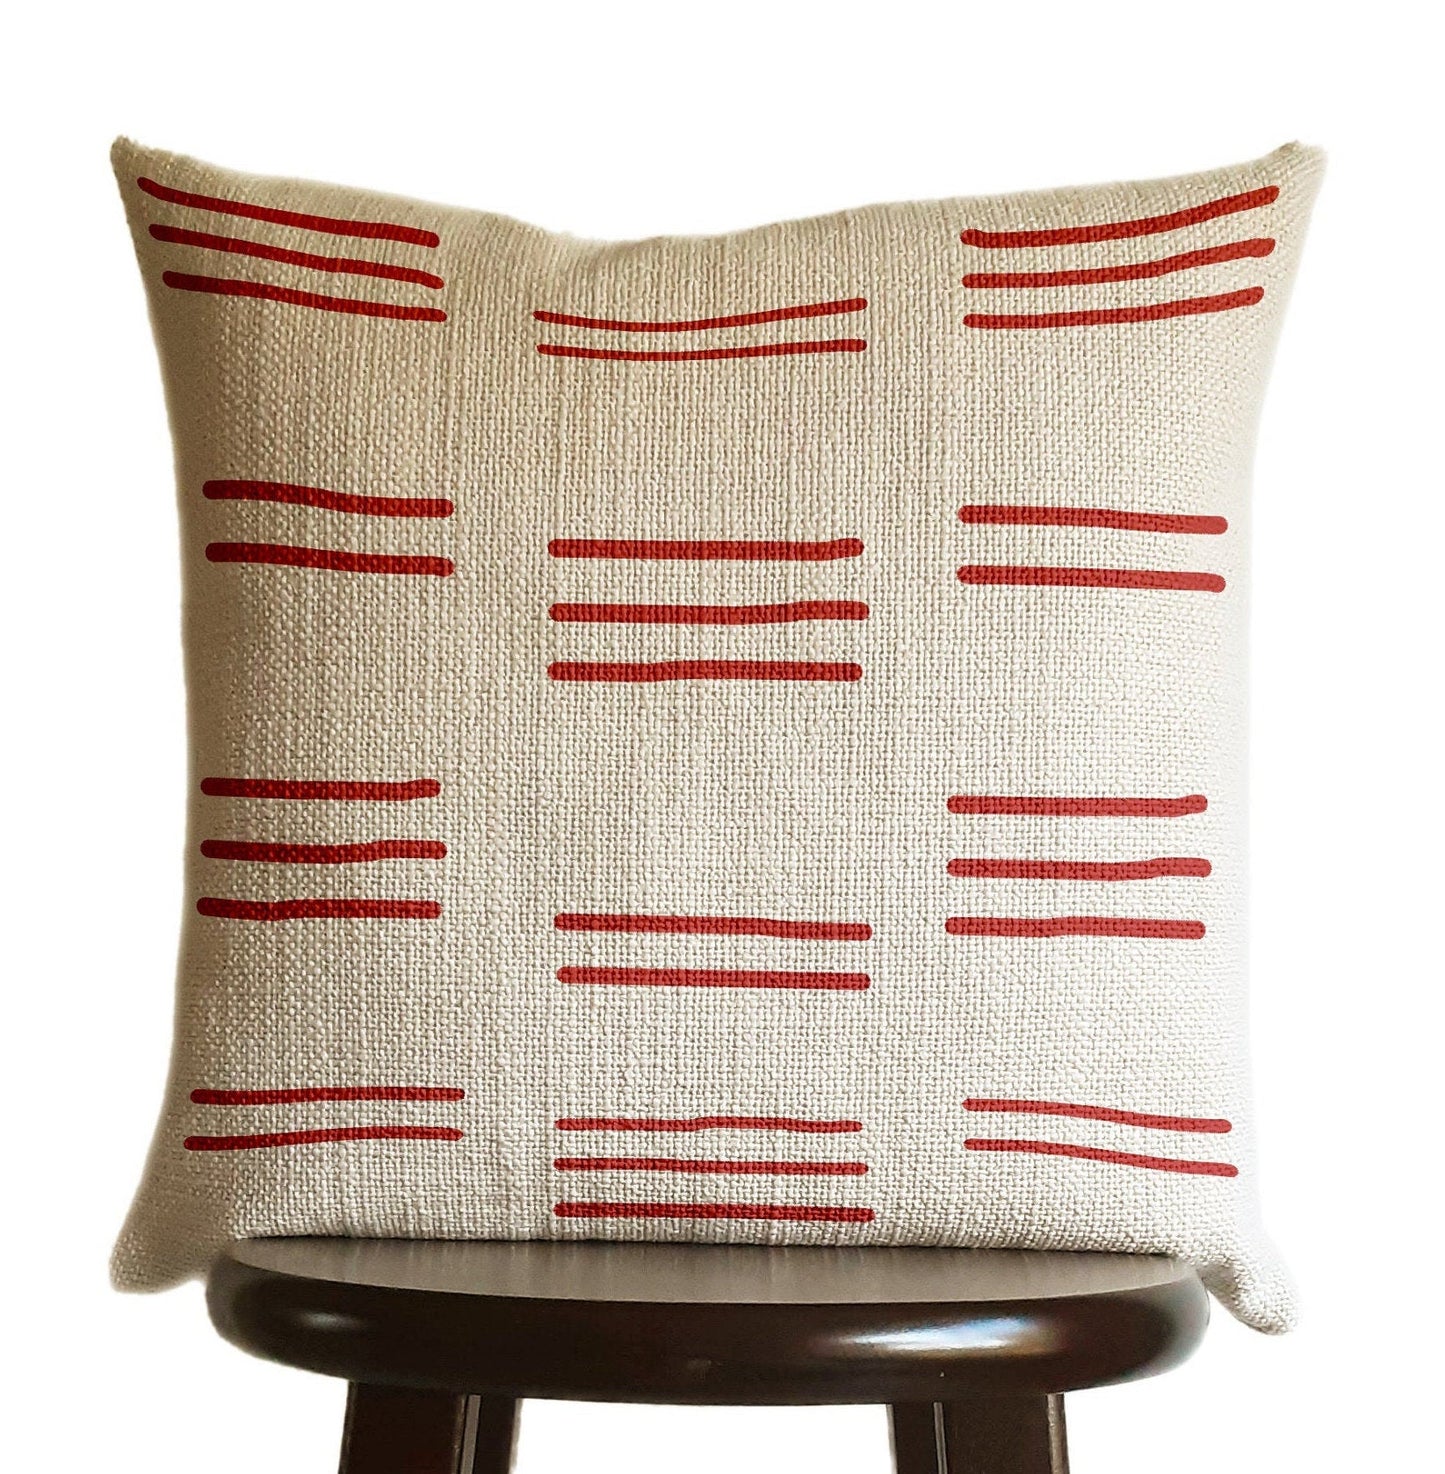 Mudcloth Pillow Cover Clay Red, Lines Mud Cloth Lines Print in Natural Oatmeal Color Textured Woven Fabric Modern Boho Home Decor - 18x18"